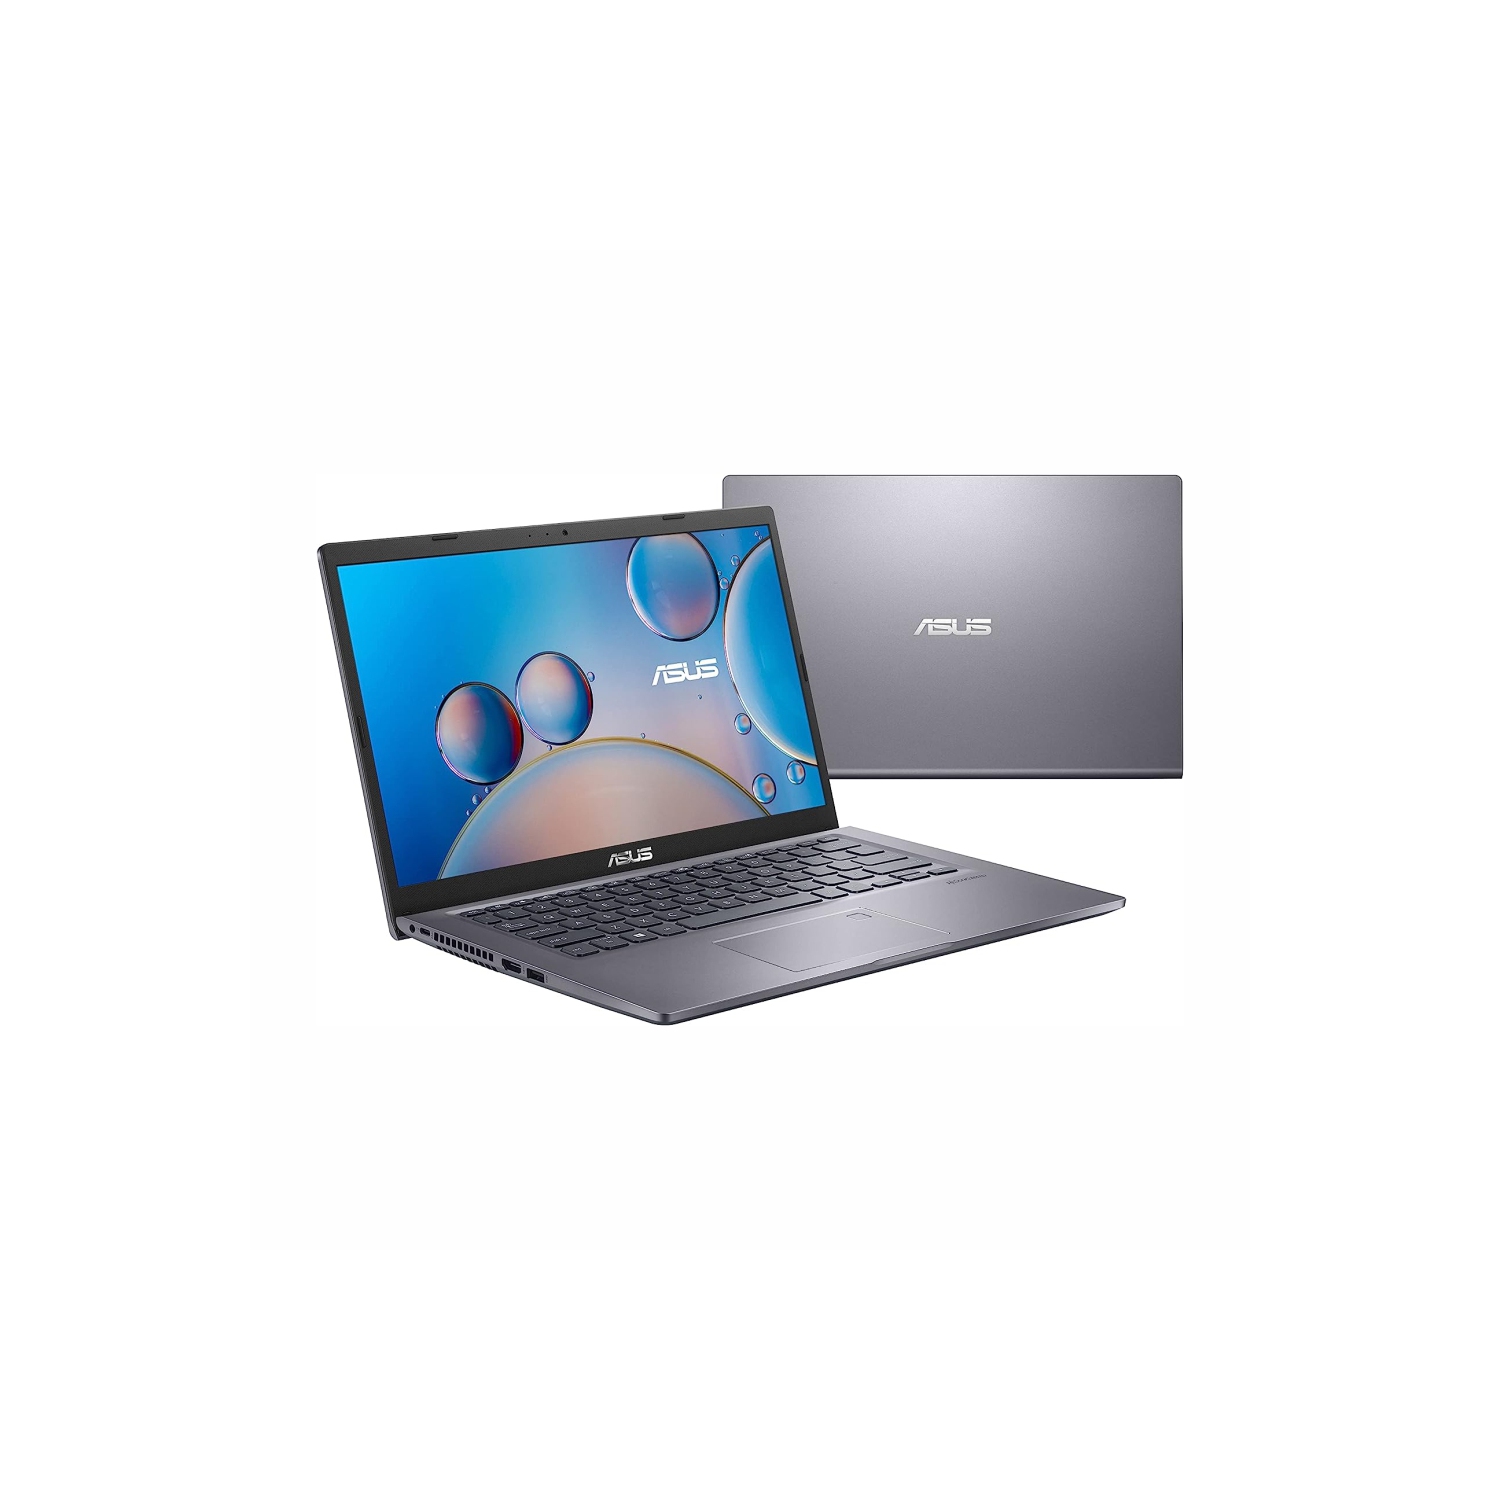 Refurbished (Excellent) - Asus VivoBook X415E Thin and Light 14" FHD Laptop (Intel Core i5-1135G7, 16GB RAM, 512GB SSD, Windows 11 Home, 1 Year Warranty) - Slate Grey